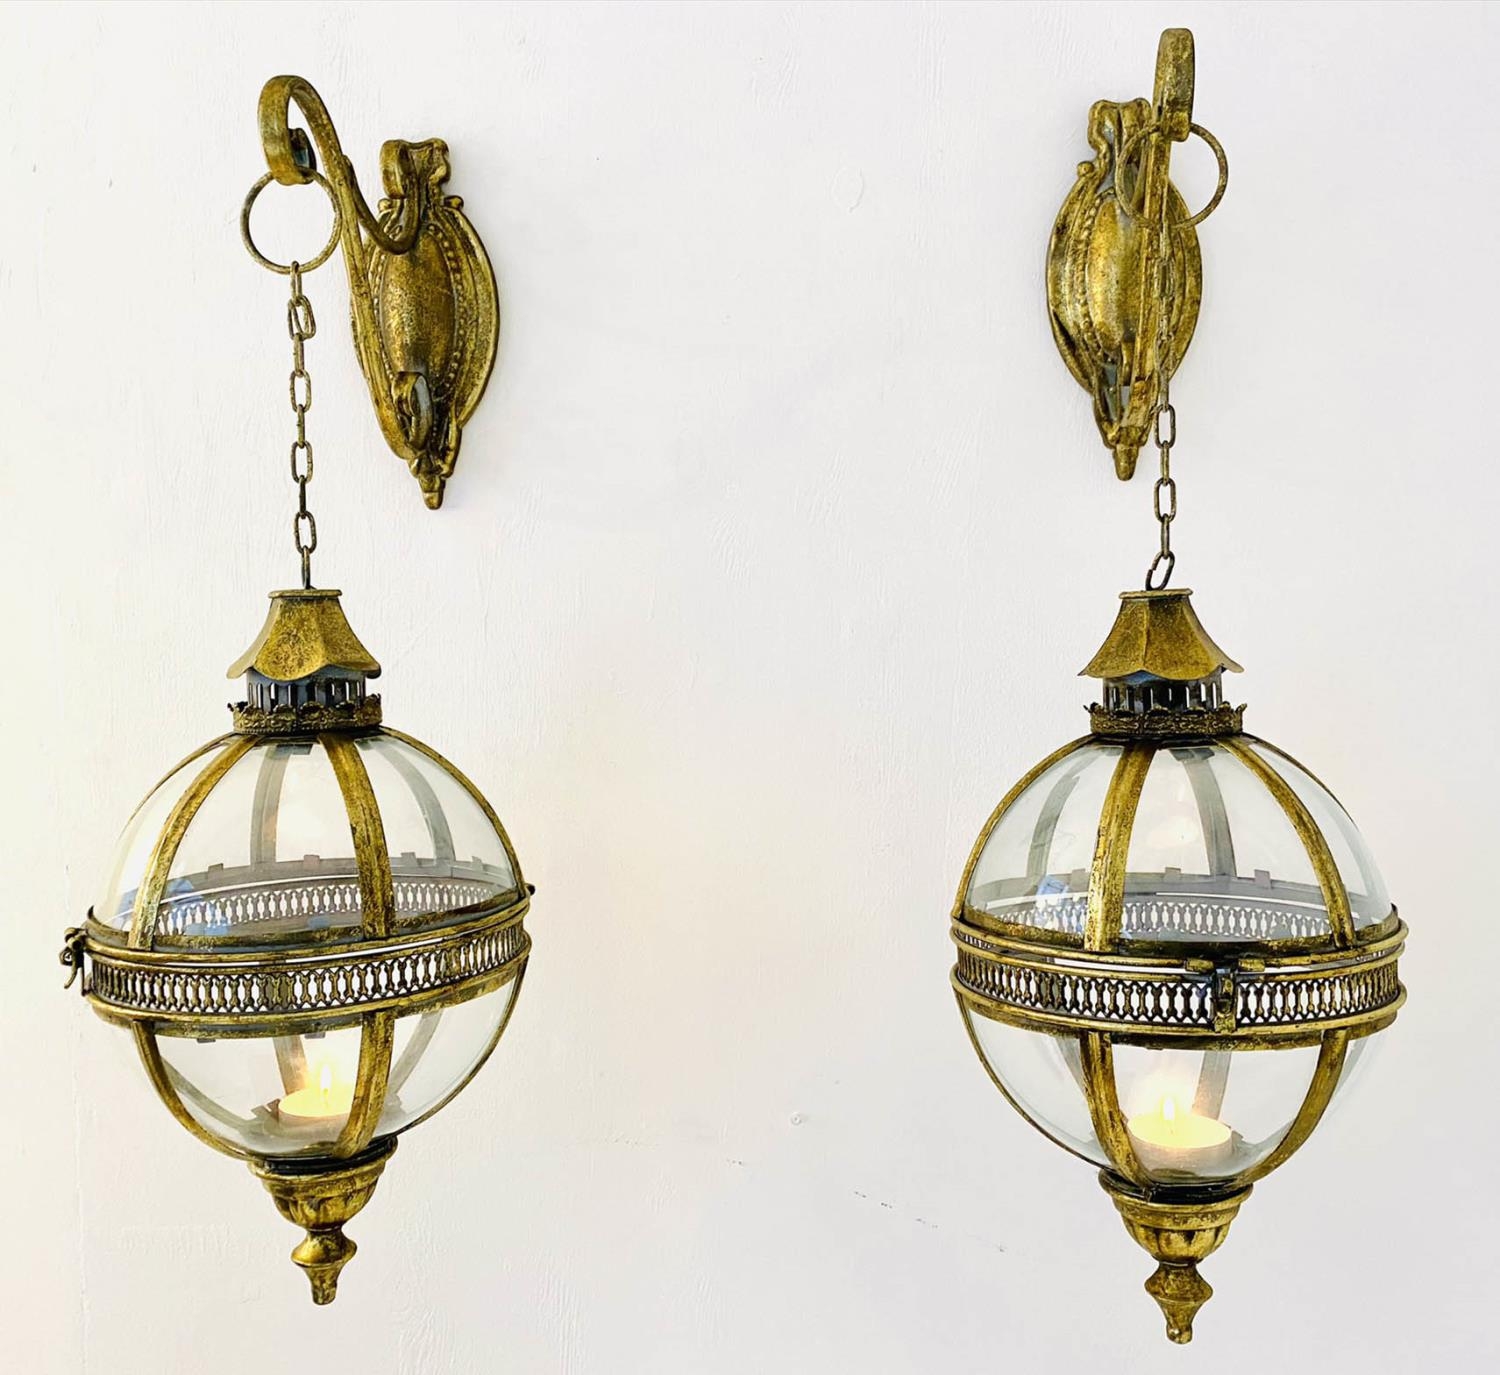 CANDLE LANTERNS, a pair, in the Regency style, 70cm hanging height, of globular form, gilt metal - Image 3 of 4